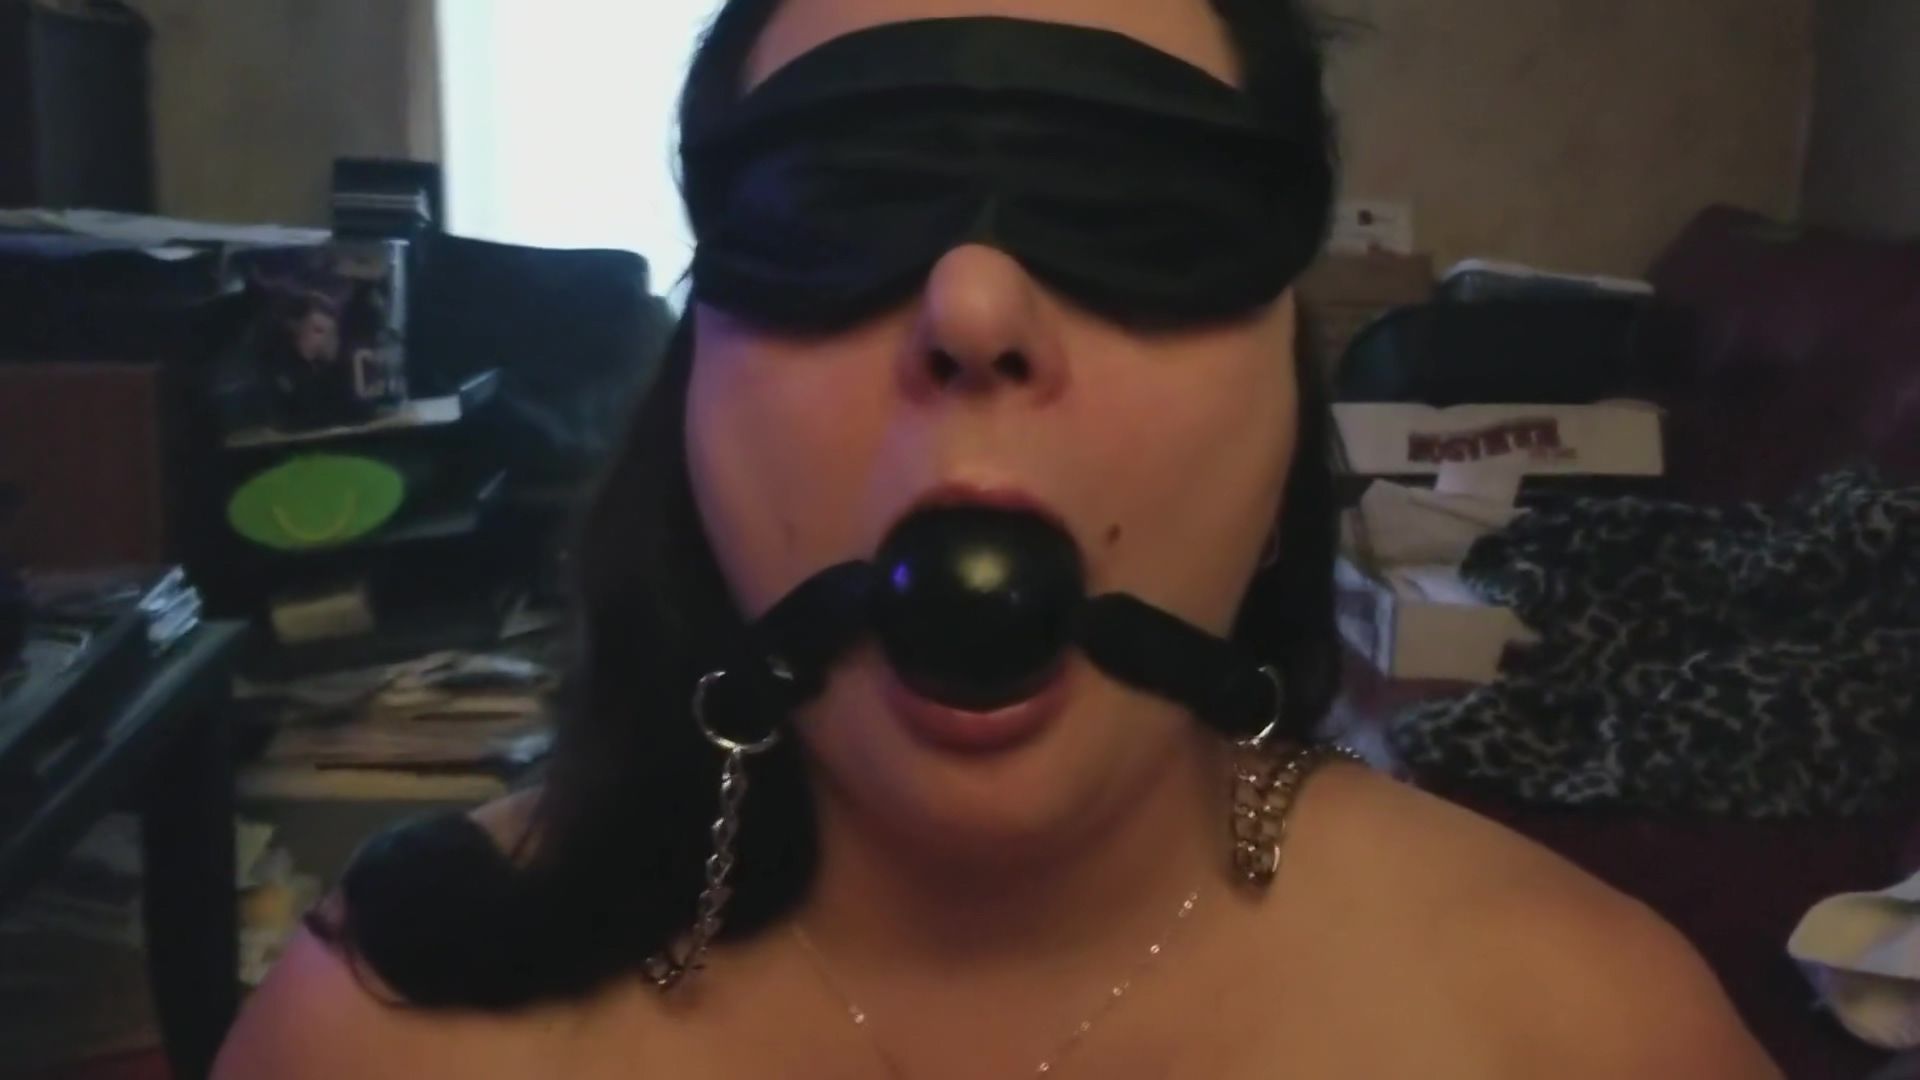 Wam Chubby Sub Teeth Blowjob Punished With Ballgag Facial Dirty Roulette